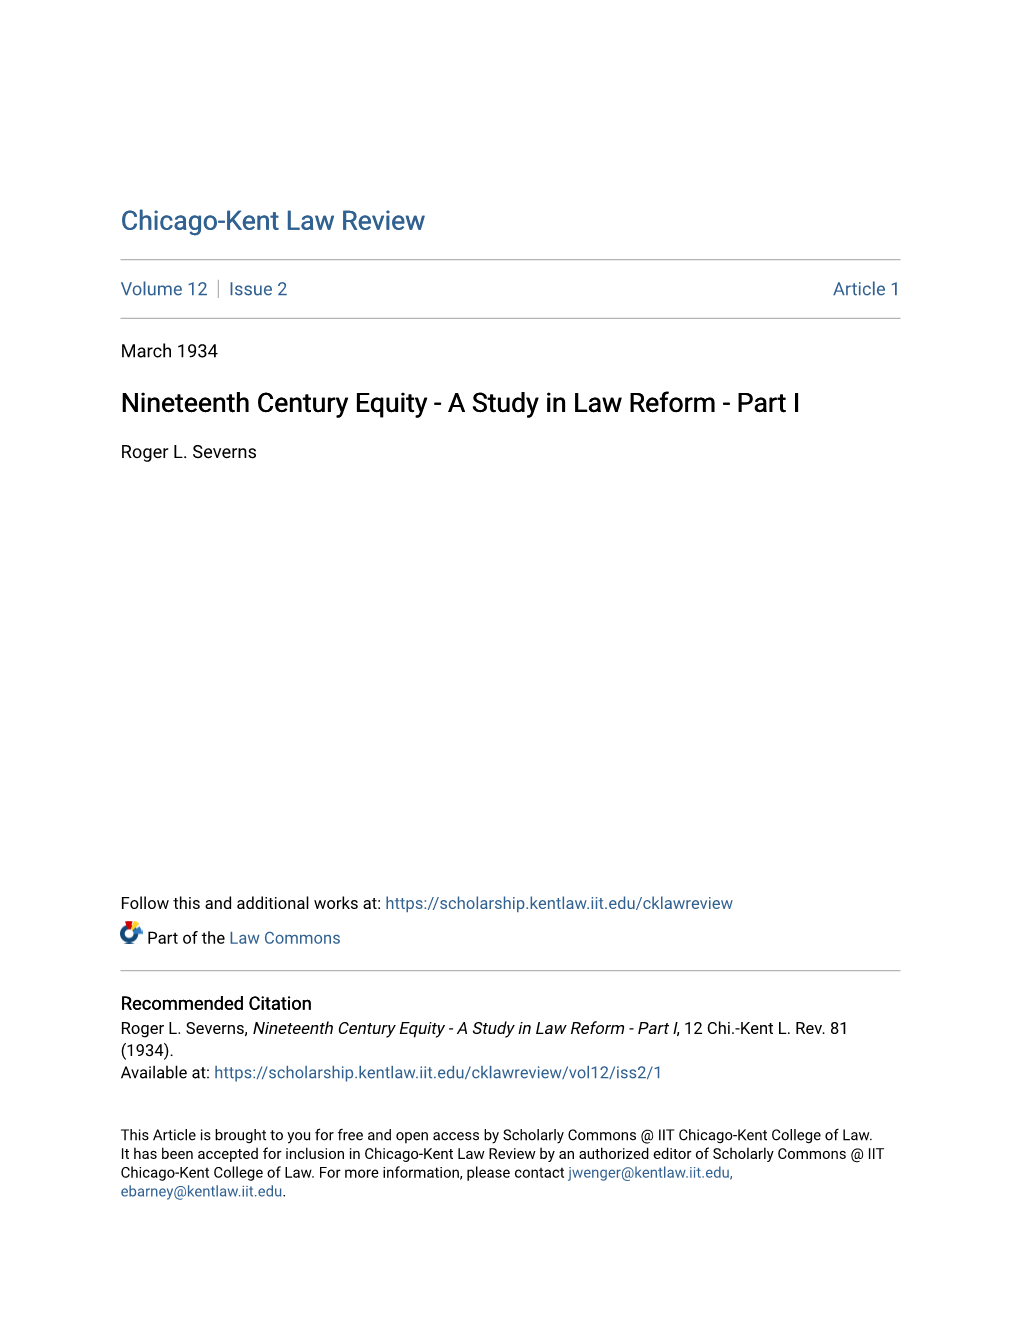 Nineteenth Century Equity - a Study in Law Reform - Part I